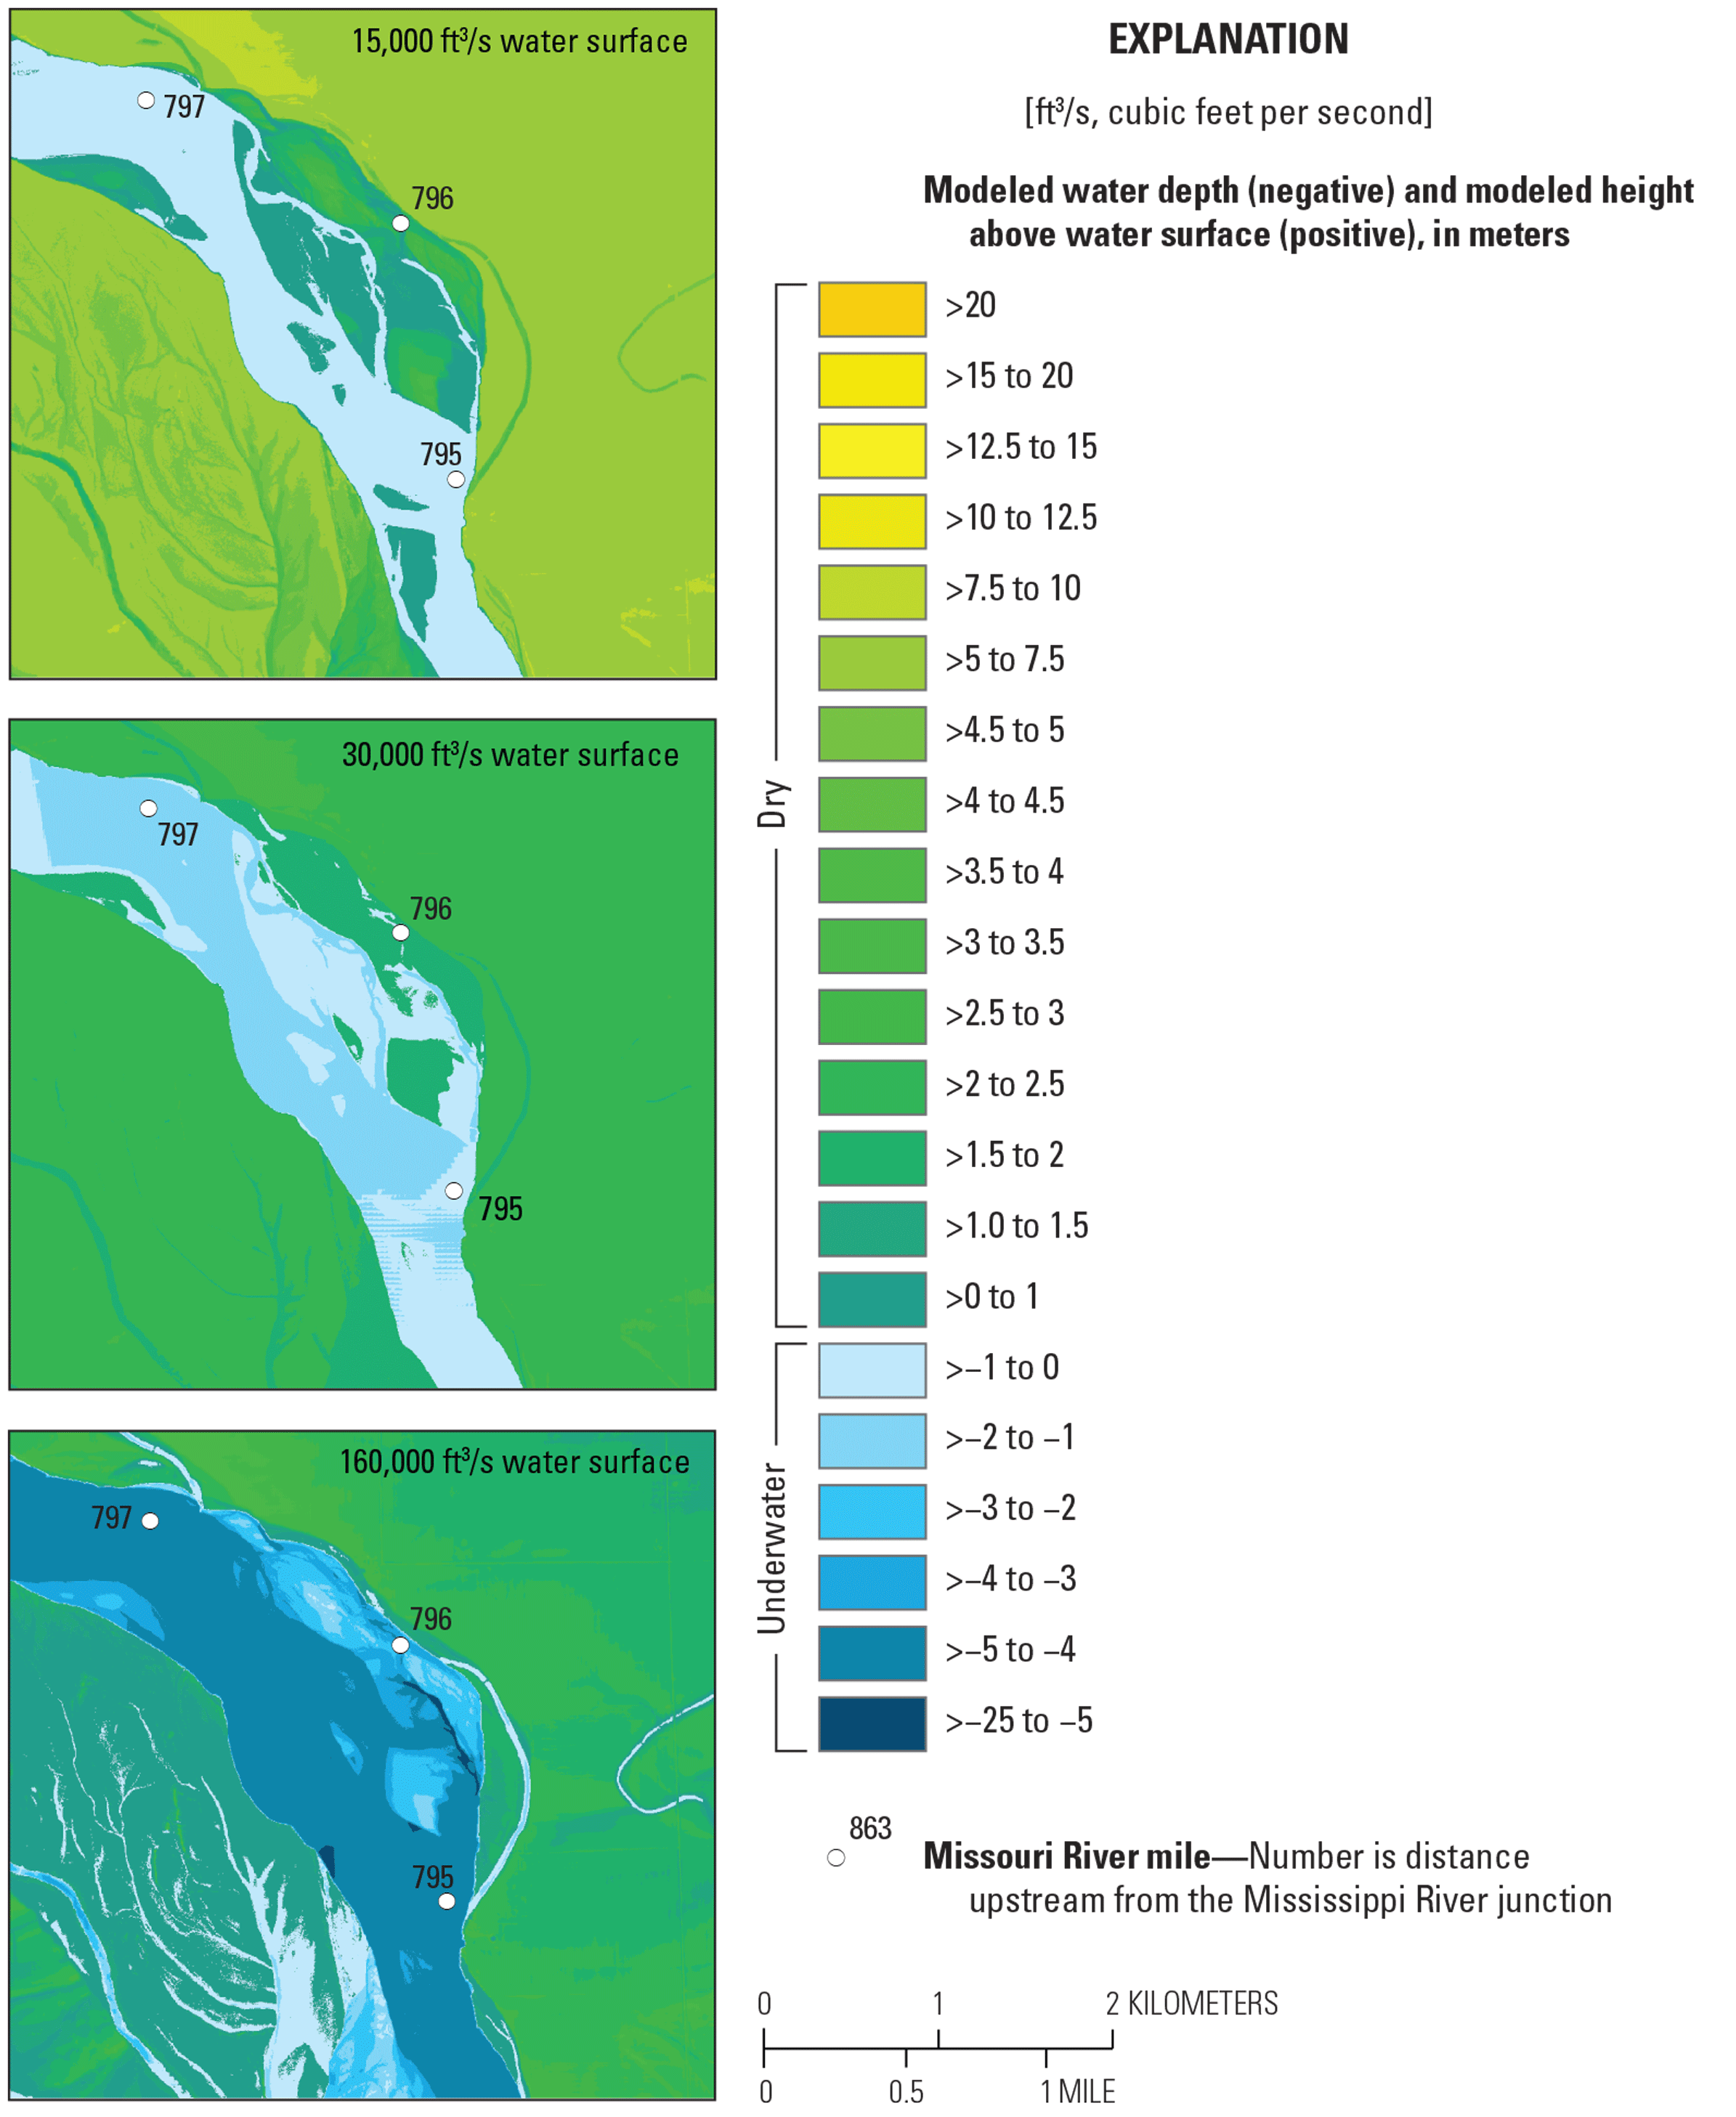 Three maps showing modeled water depth and height with symbols for river miles